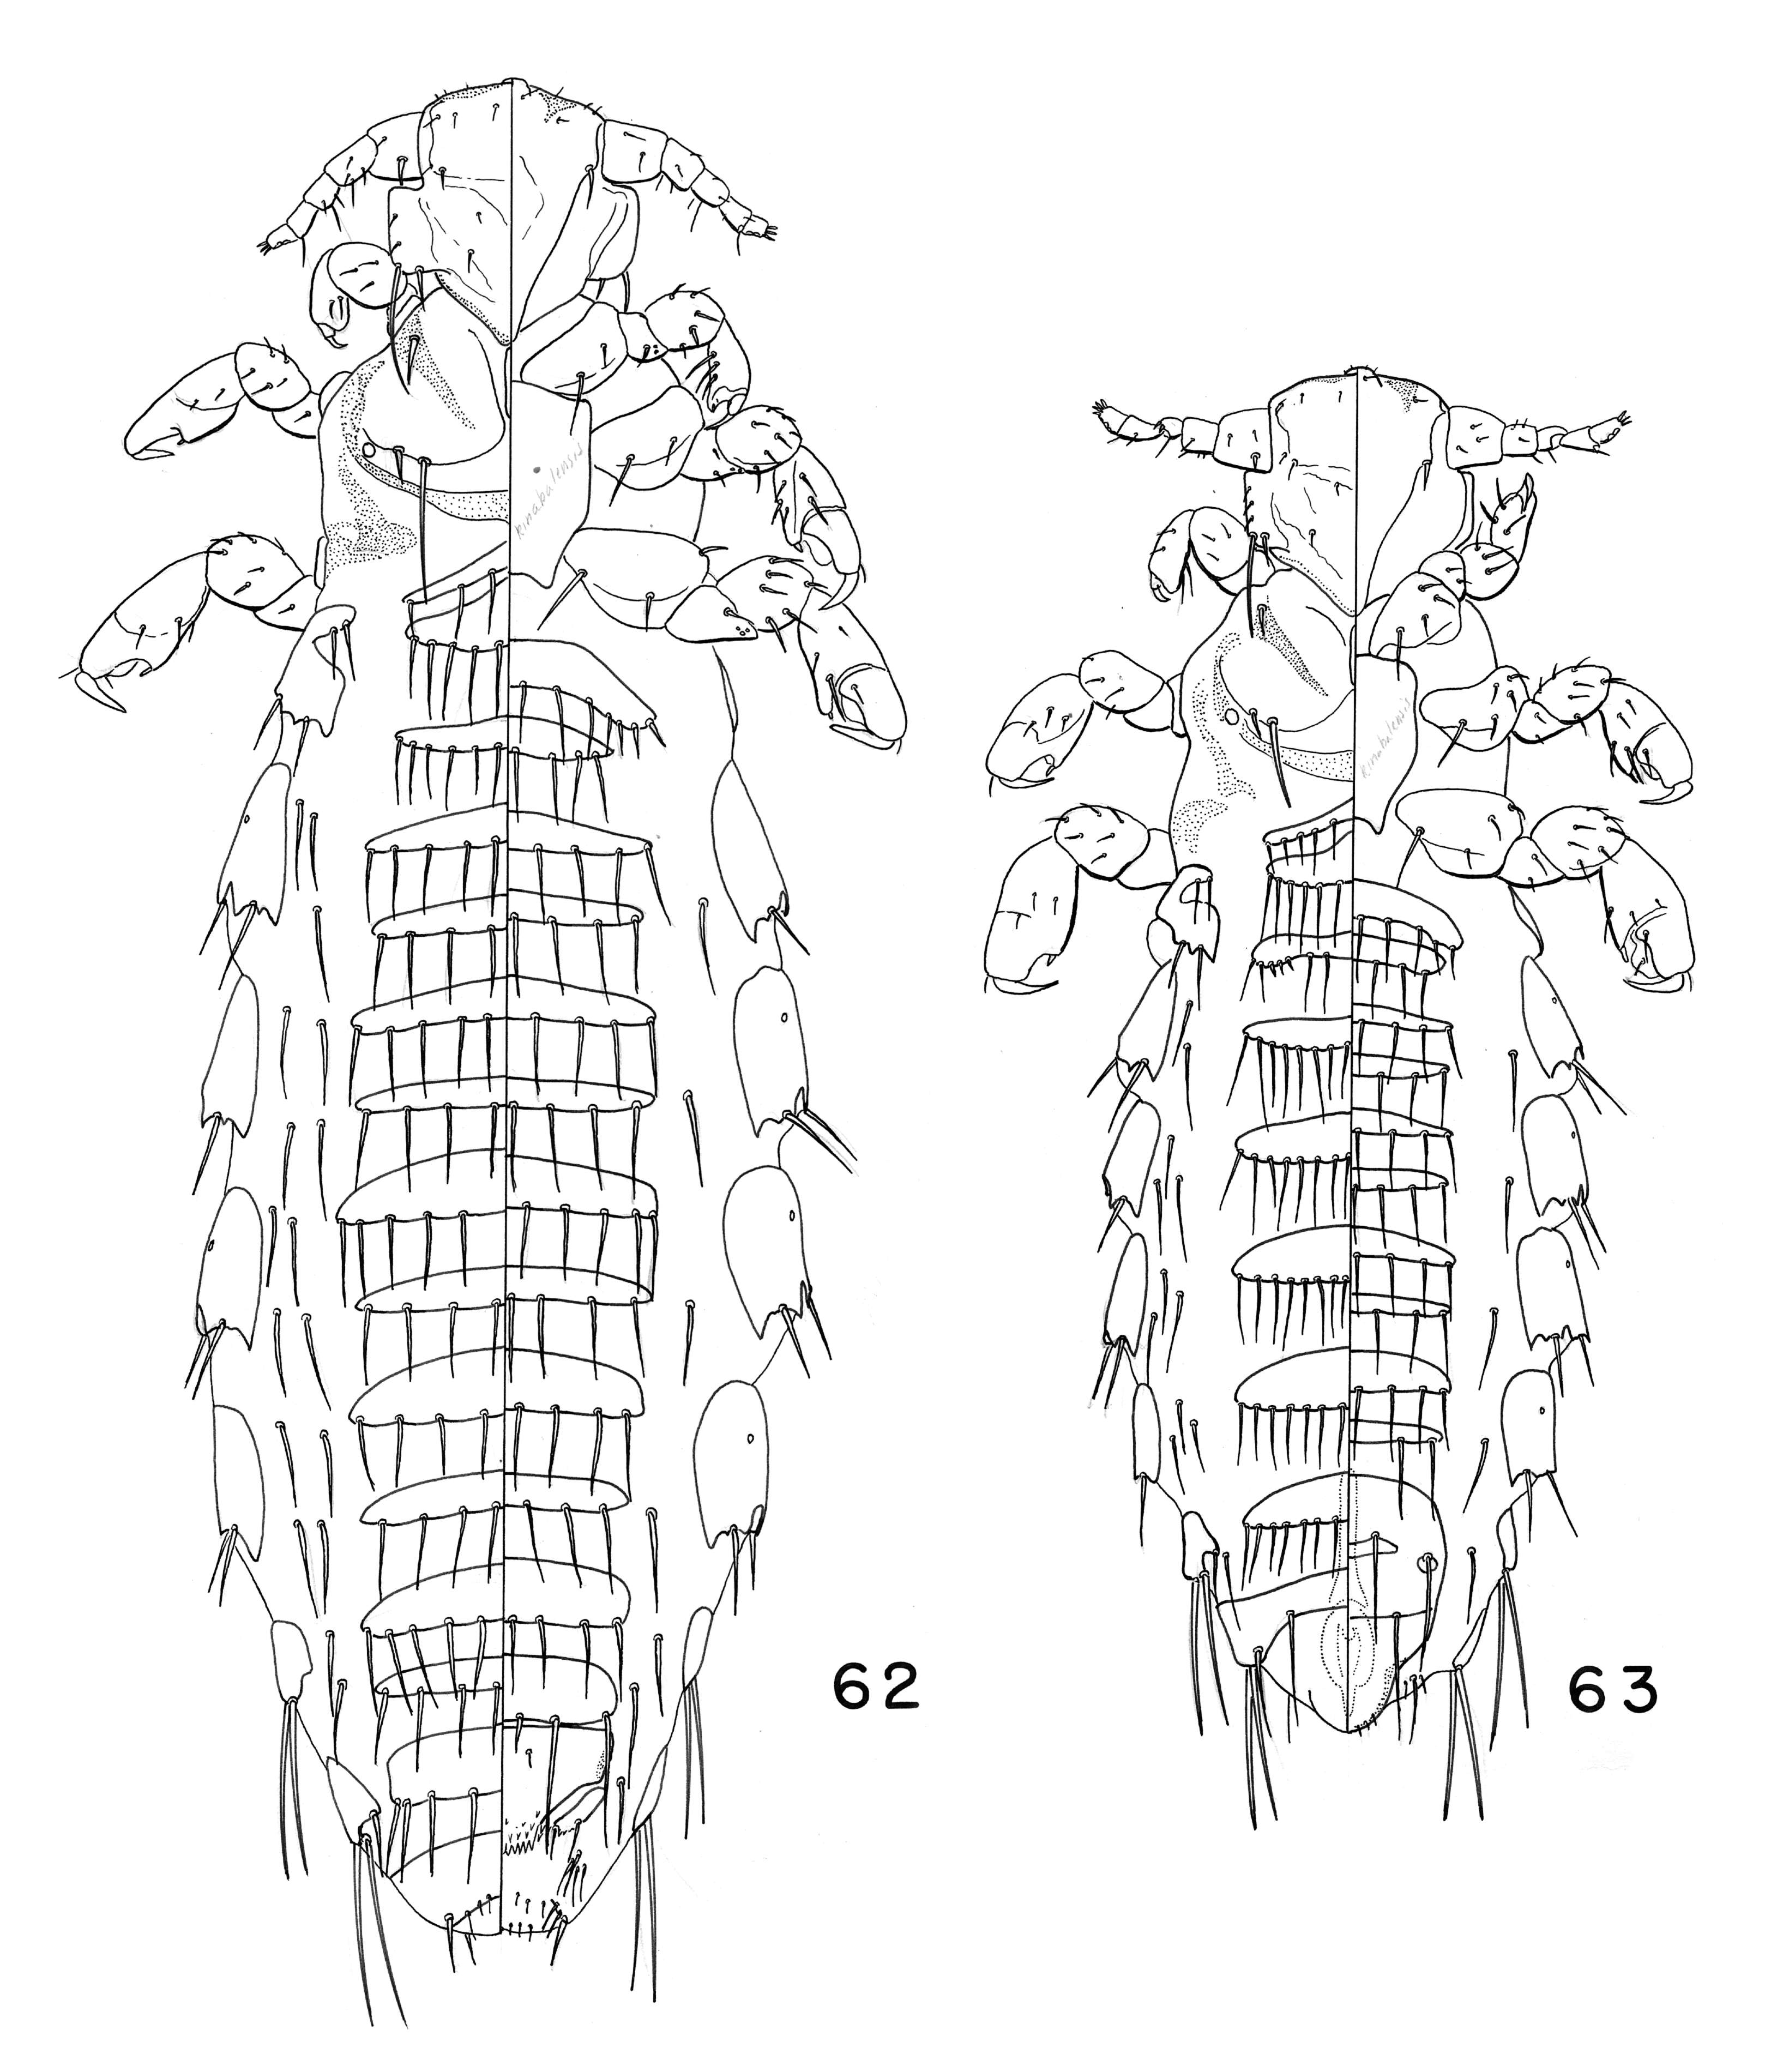 Image of book louse